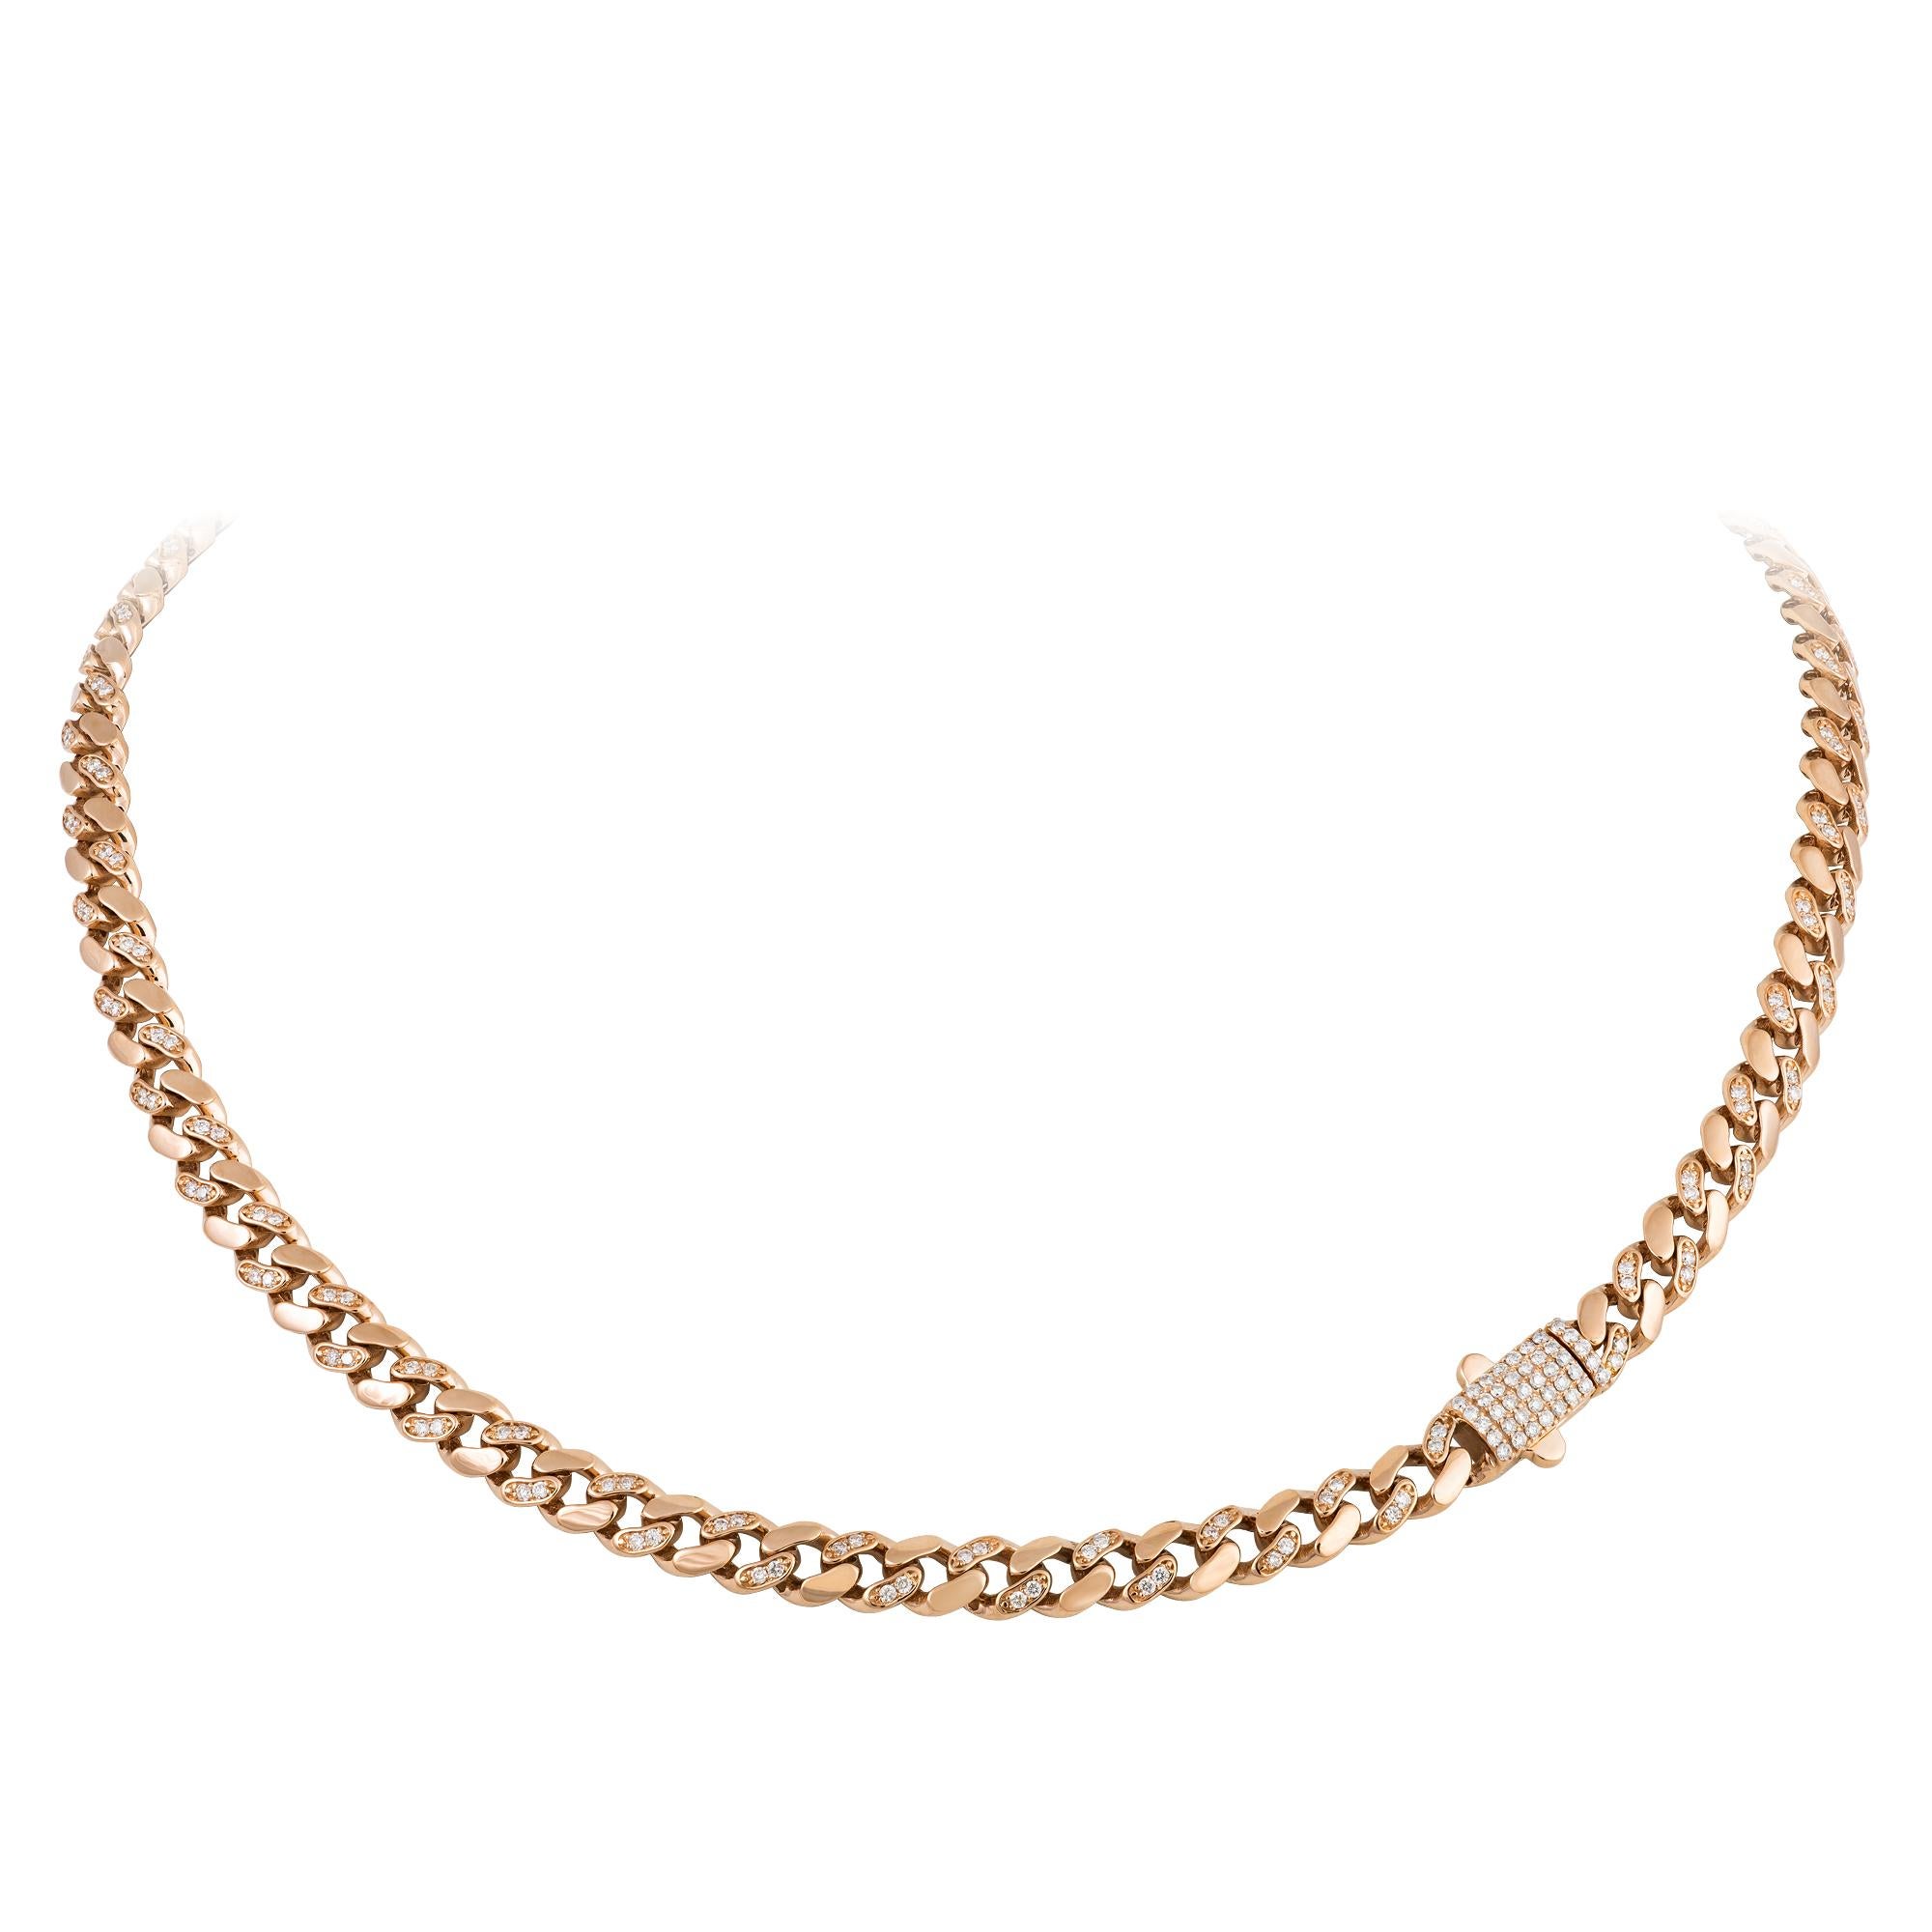 Modern Chain Pink Gold 18K Necklace Diamond For Her For Sale